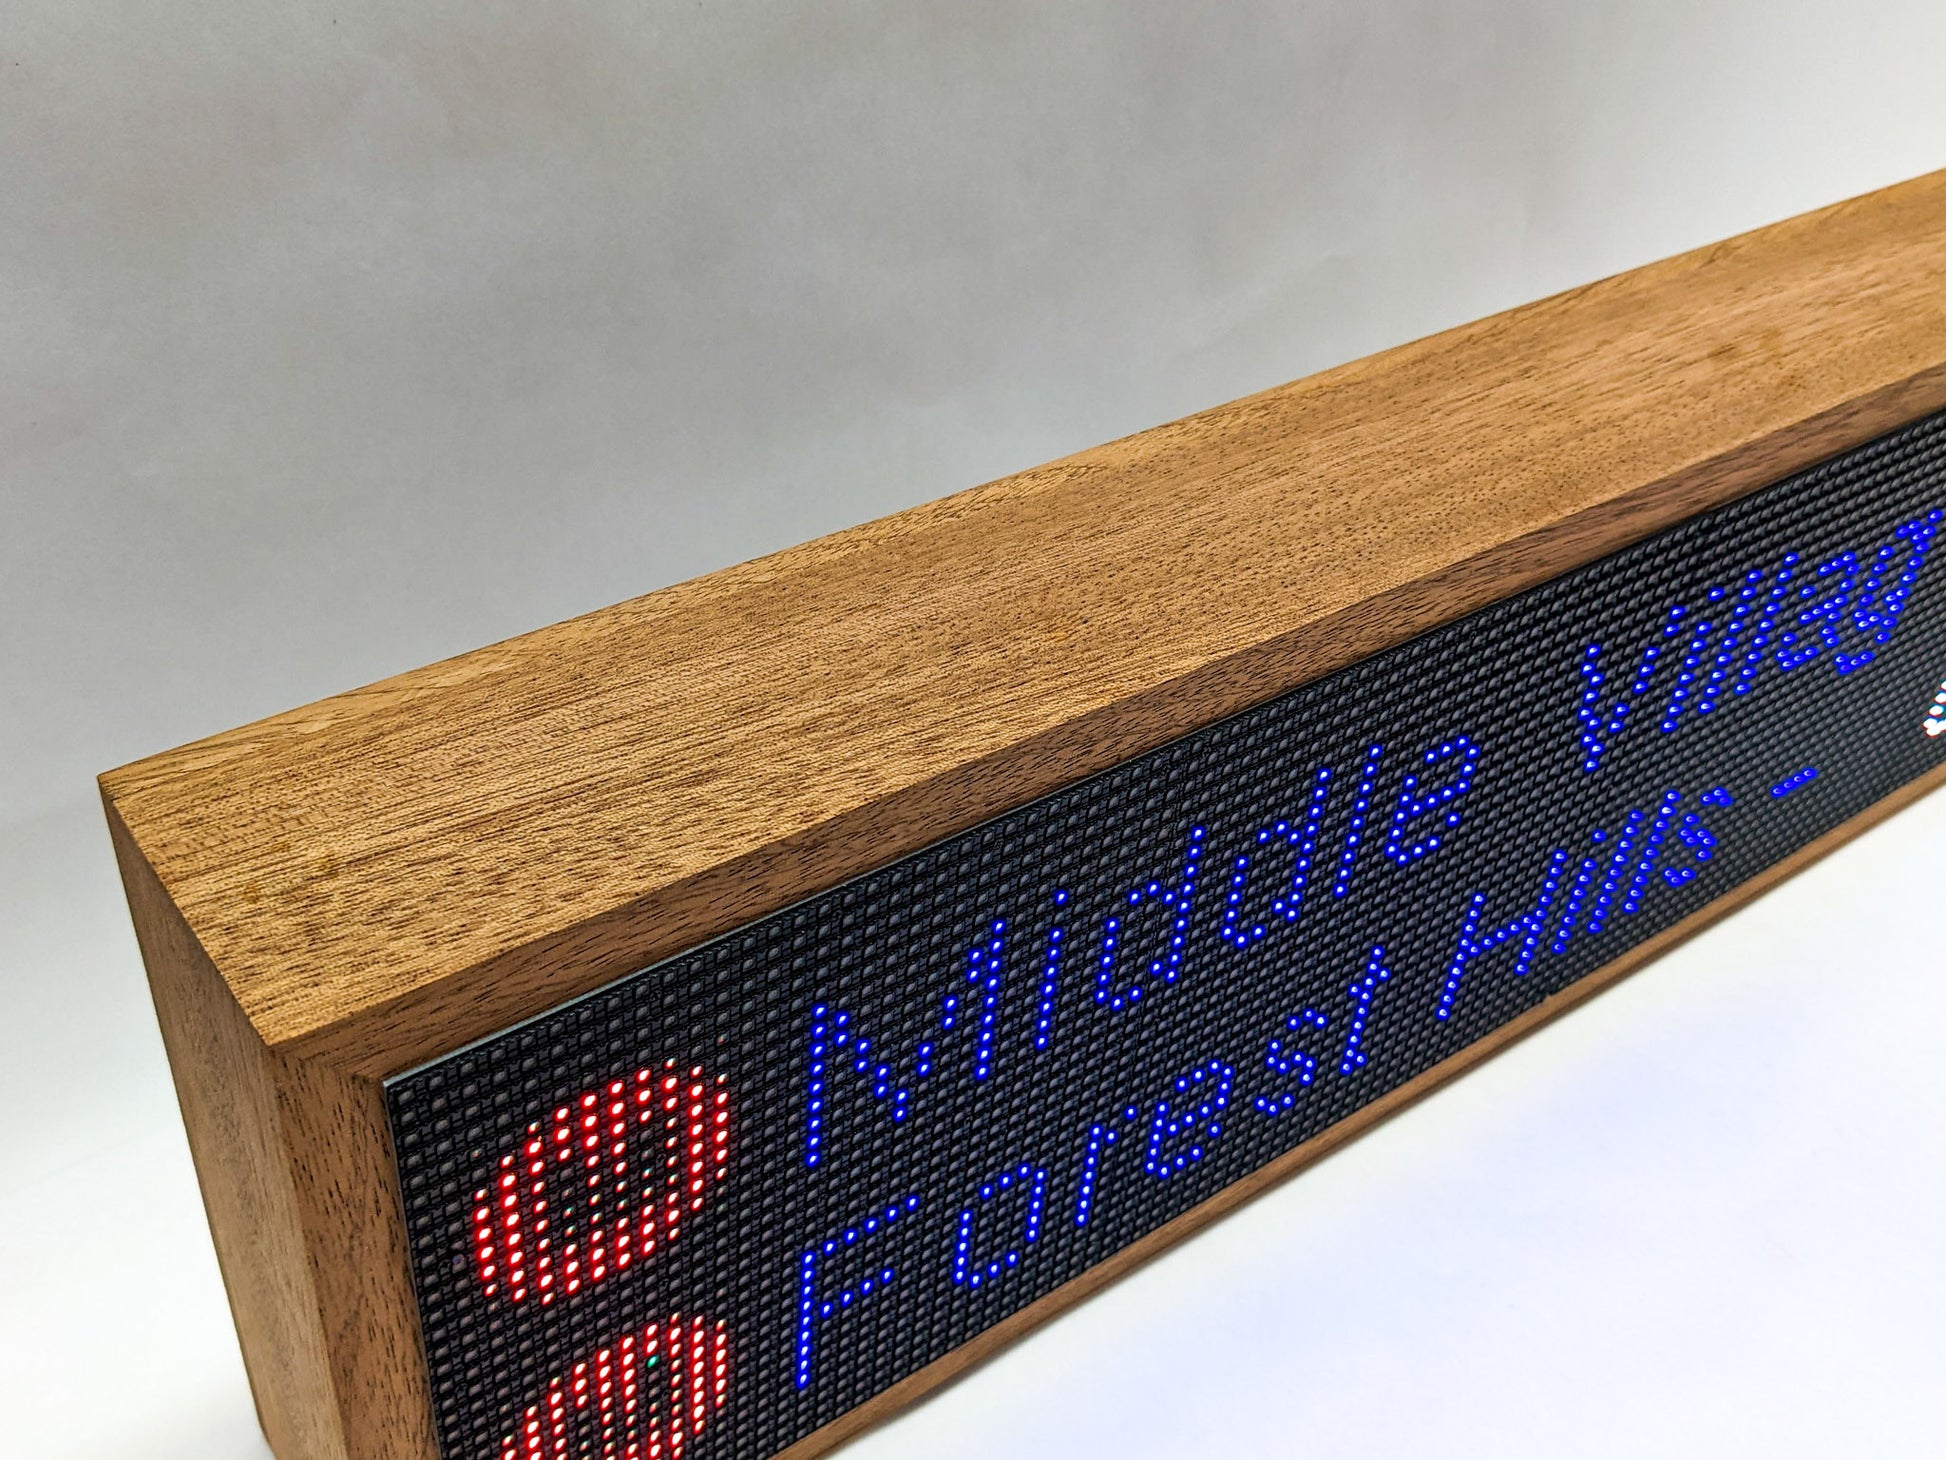 A top-view of the mahogany frame on the top of the NYC subway clock. THe mahogany is thick and angular with interesting darker streaks of wood grain. A black LED screen meets the wood with signs for the M train arrival times.